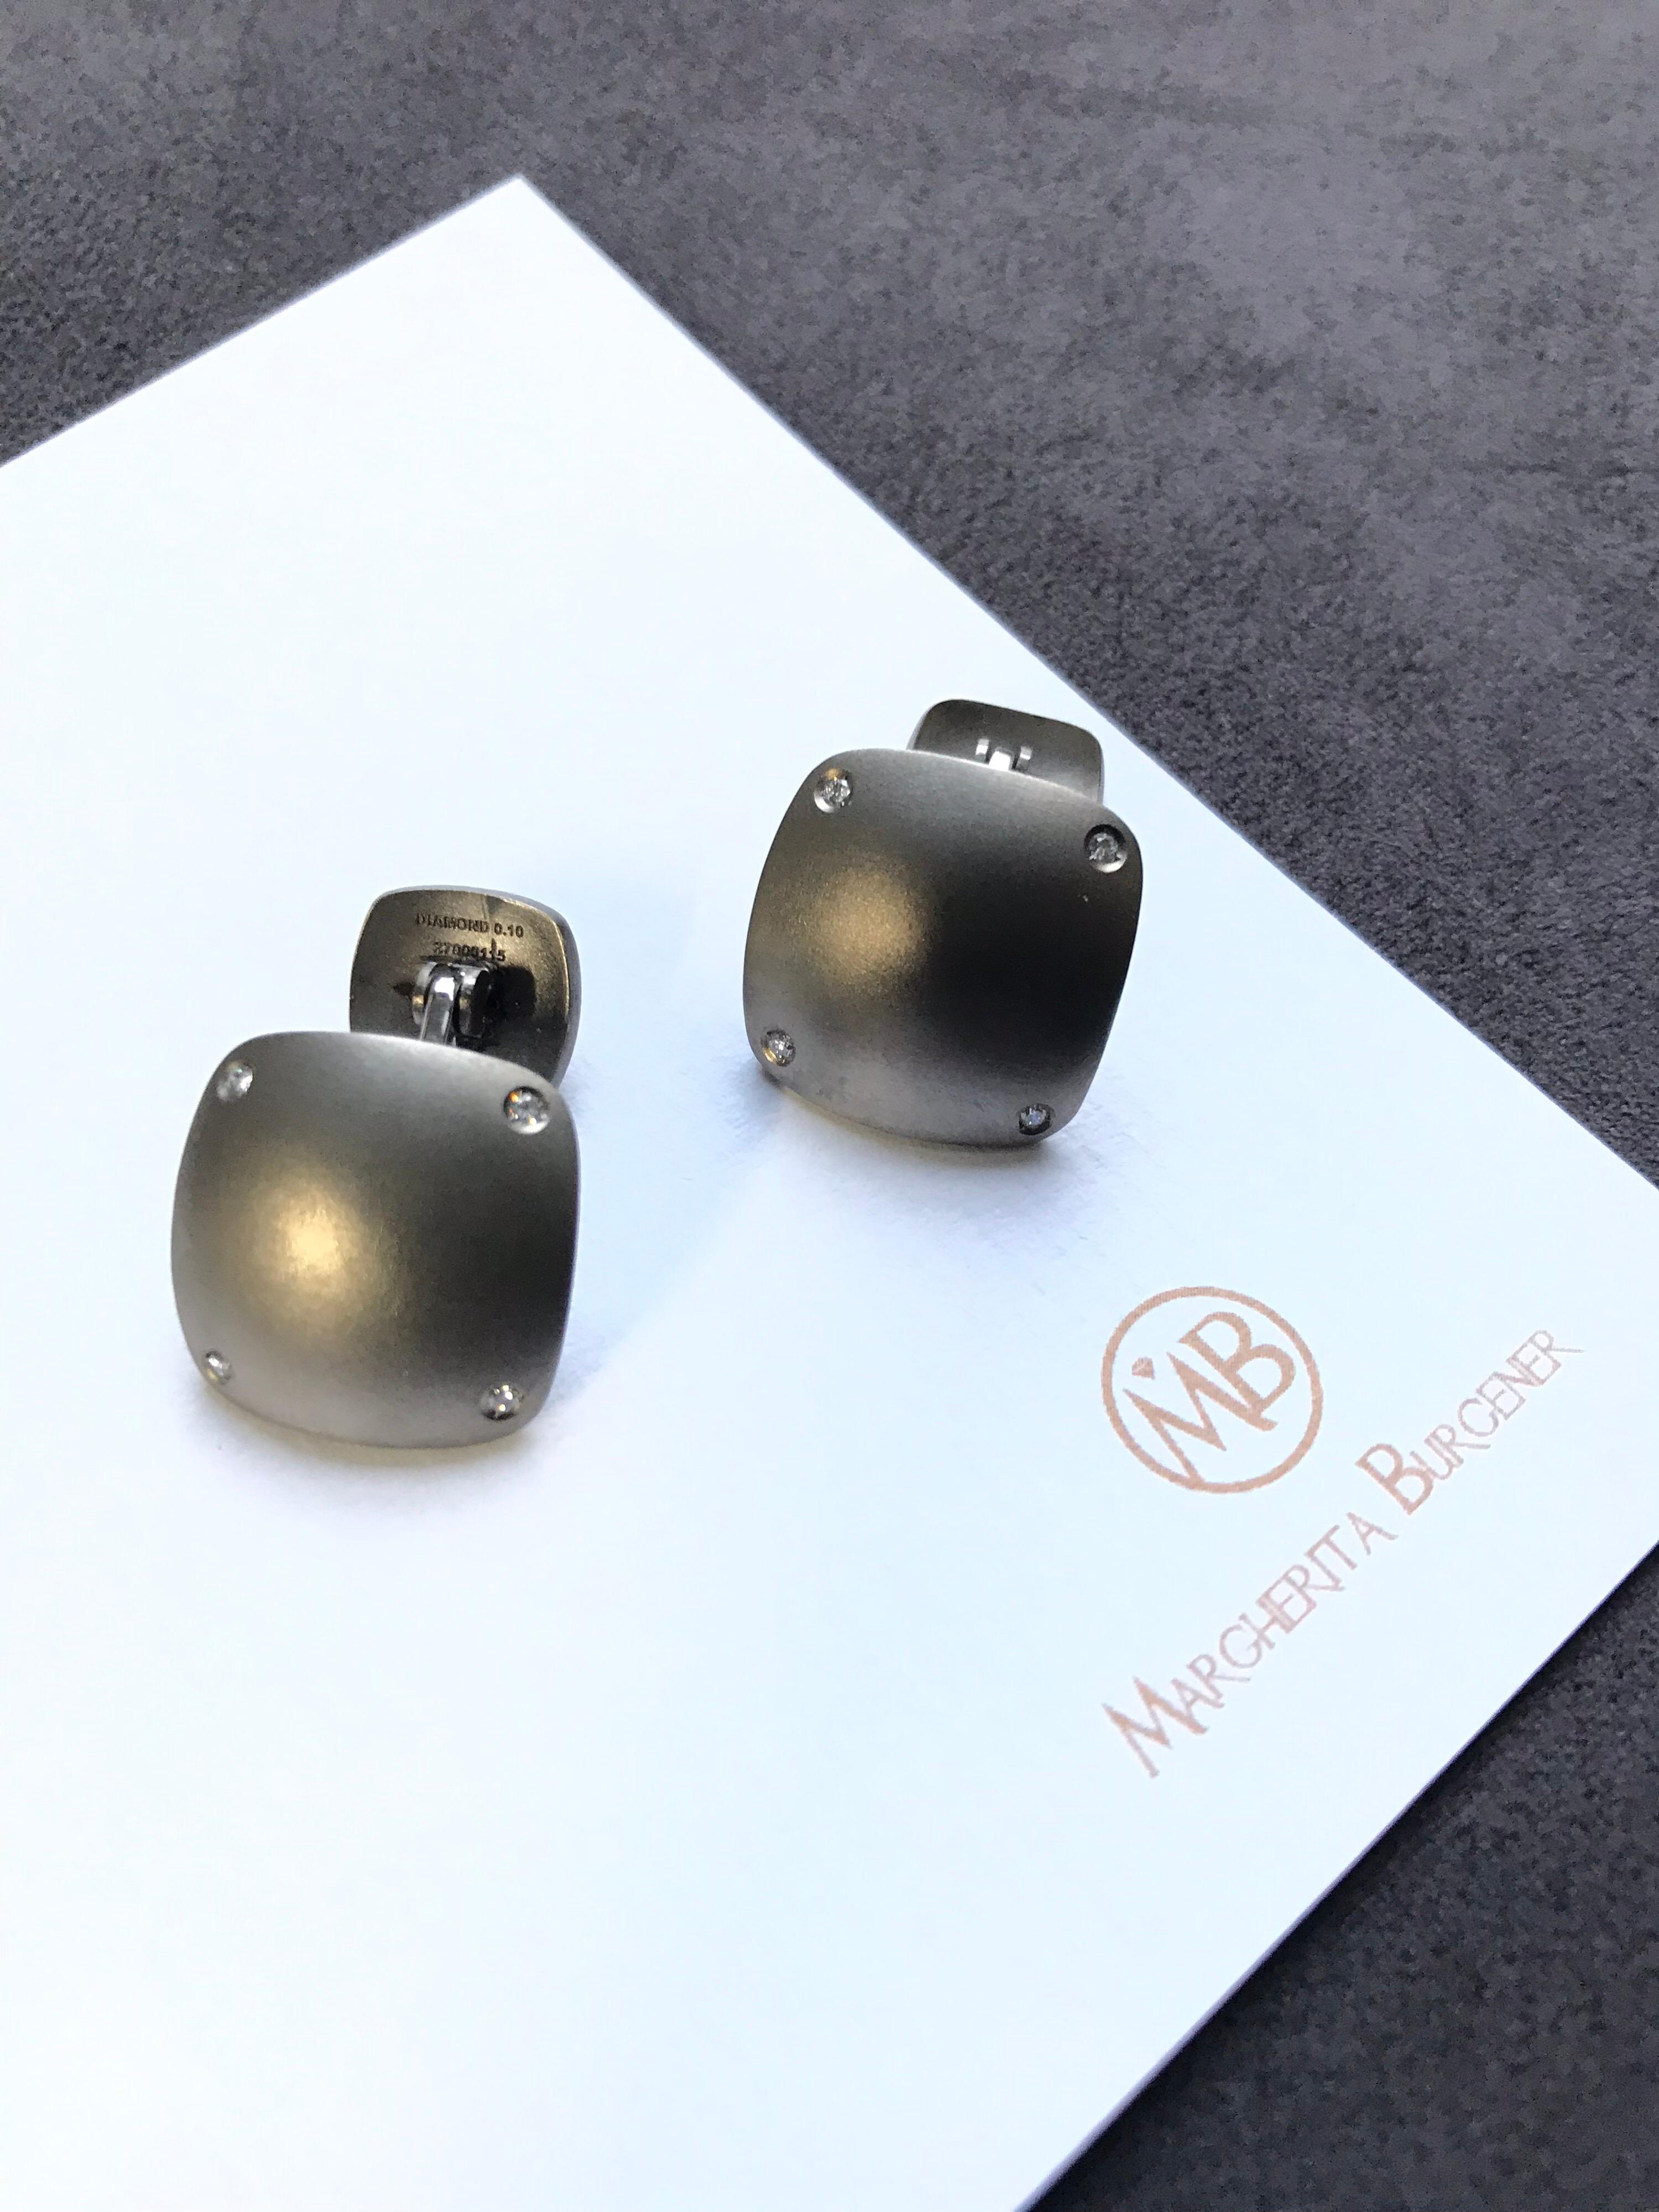 Modern yet classic cufflinks, handcrafted in titanium.
highlighted by 8 diamonds for total ct 0,09
18KT white gold total grams 1.30

They can be customized engraving two letters or a date, upon request. Please let us know your wish  and we will